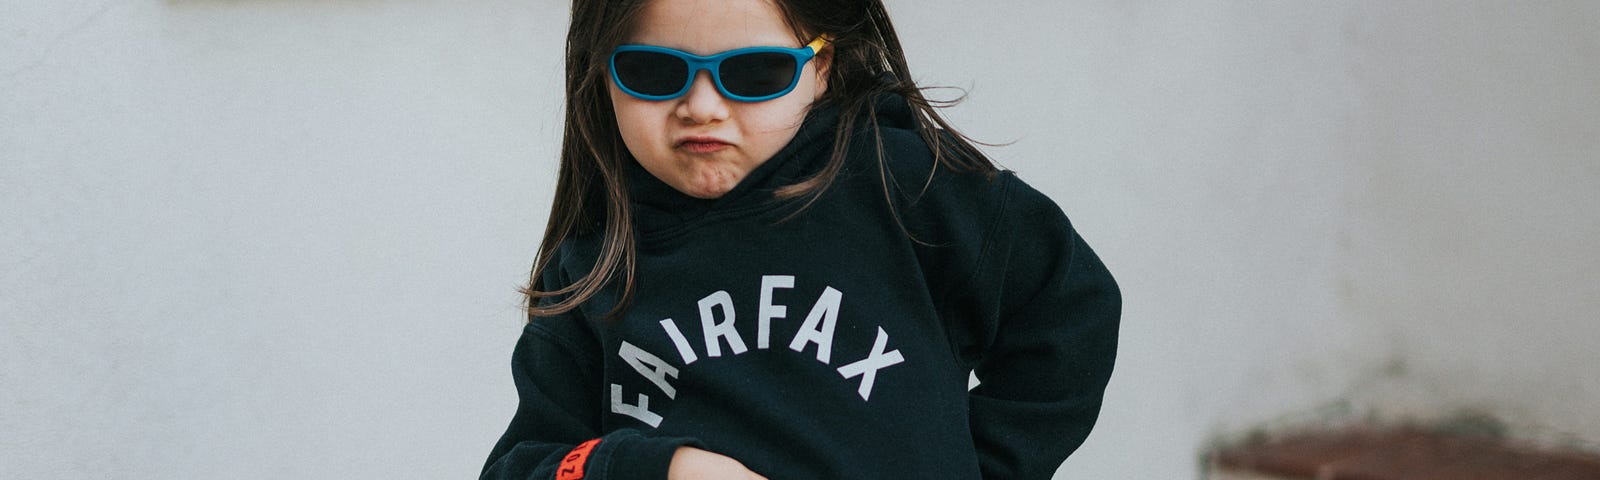 Little girl with sunglasses acting cool